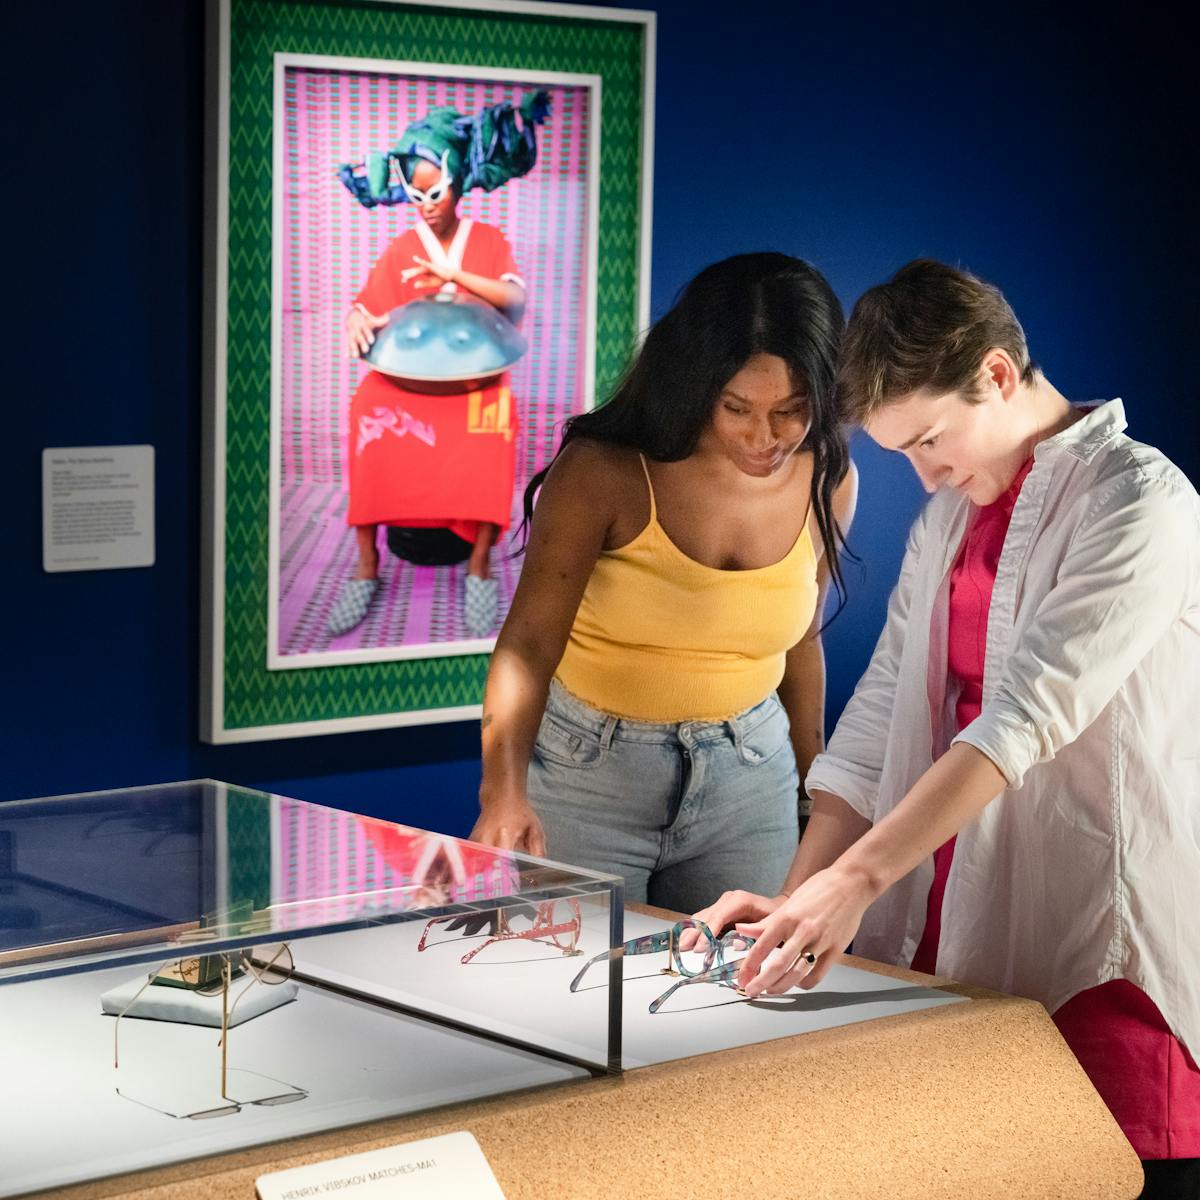 Photograph of two people exploring an exhibition. They are stood side by side at a display case which contains pairs of spectacles. Outside of the case are two pairs of spectacles which the visitors are able to touch and explore with their hands. The rest of the gallery behind them is dark blue, except for a spotlit colourful framed photograph on the wall showing an individual in a bright red dress wearing white rimmed sun glasses with a large domed metal object on their lap.